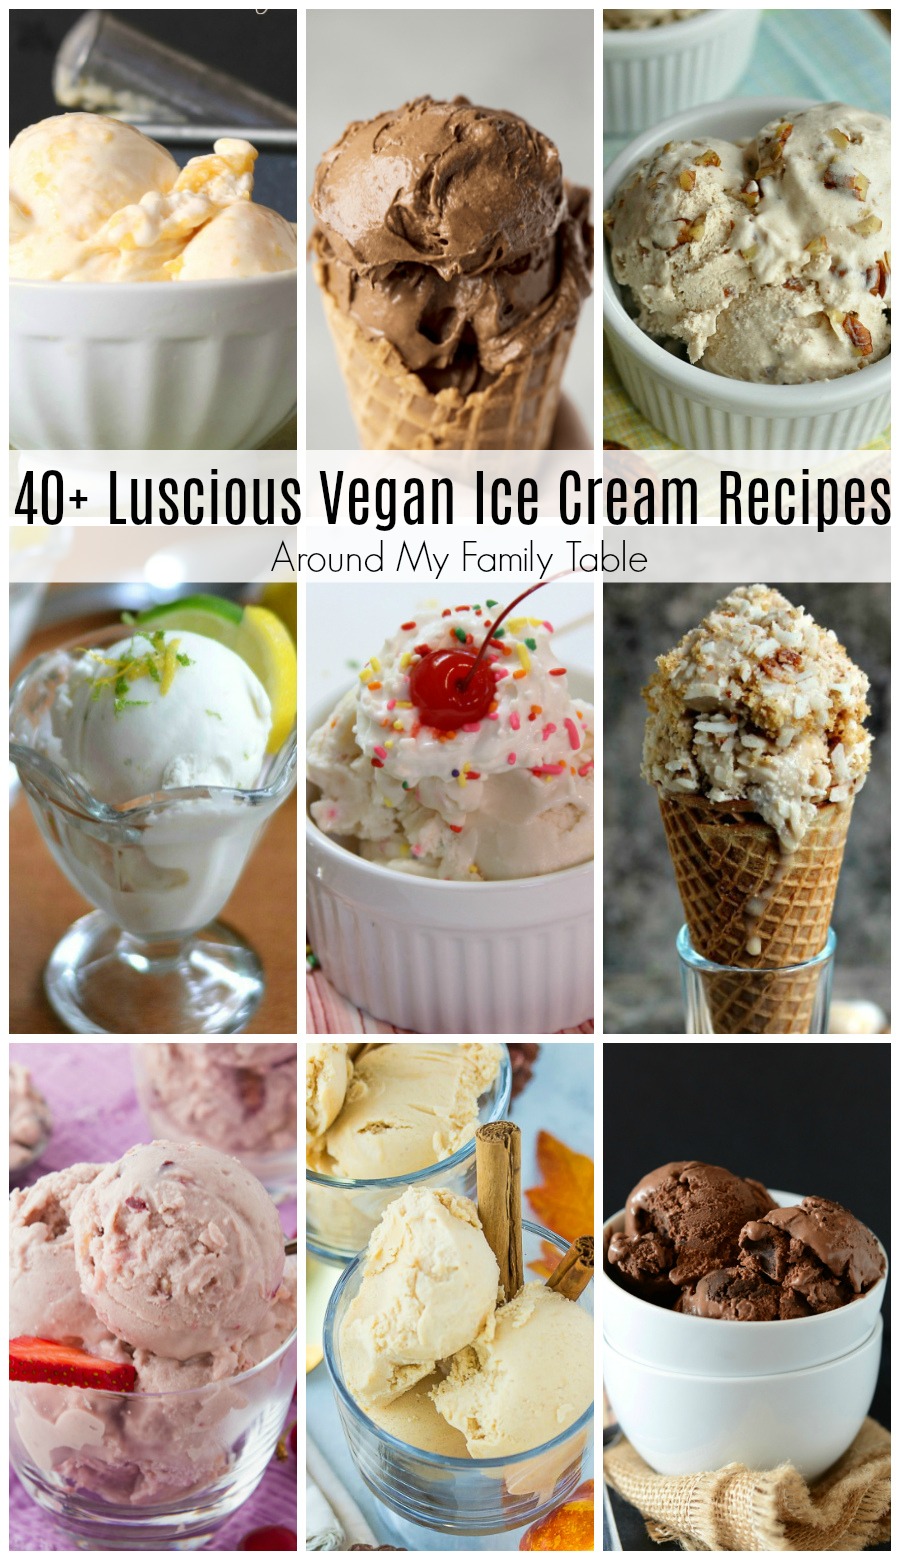 Homemade ice cream is a must for everyone, even those who eat dairy free. Here are over 40 vegan ice cream recipes you've GOT to make! #vegan #icecream #vegandessert #veganicecream #dairyfreeicecream #dairyfreedessert #homemadeicecream via @slingmama